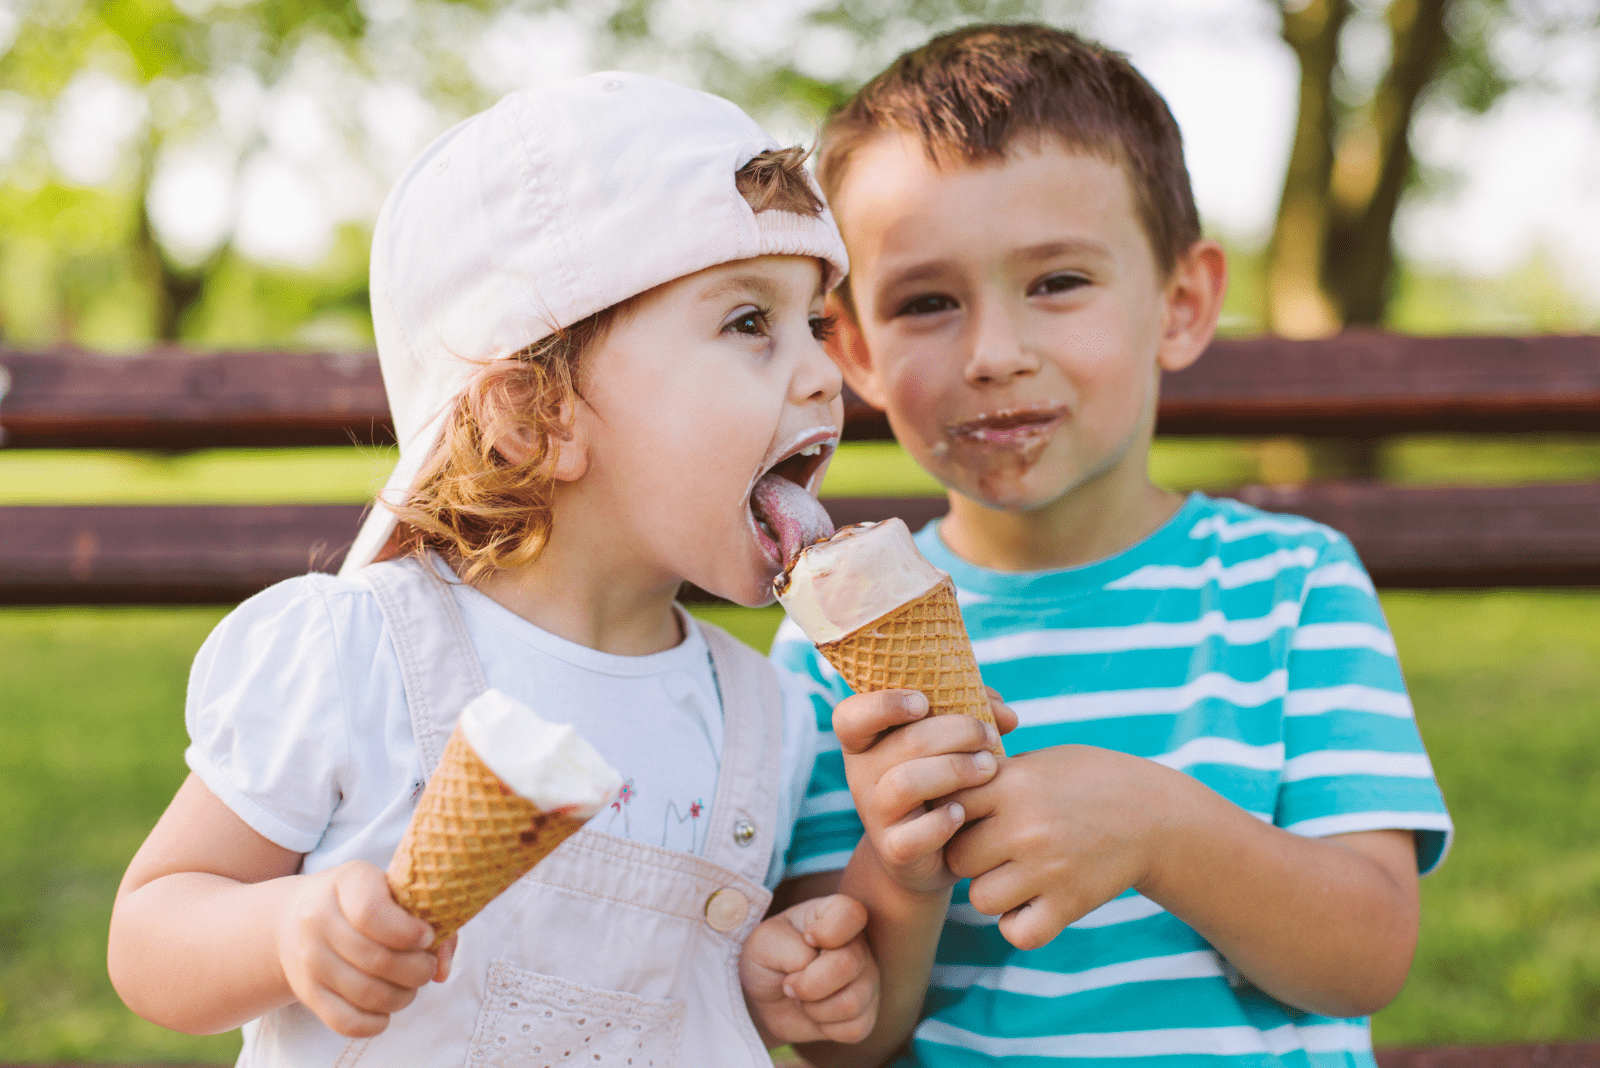 smiling brother and sister licking ice cream